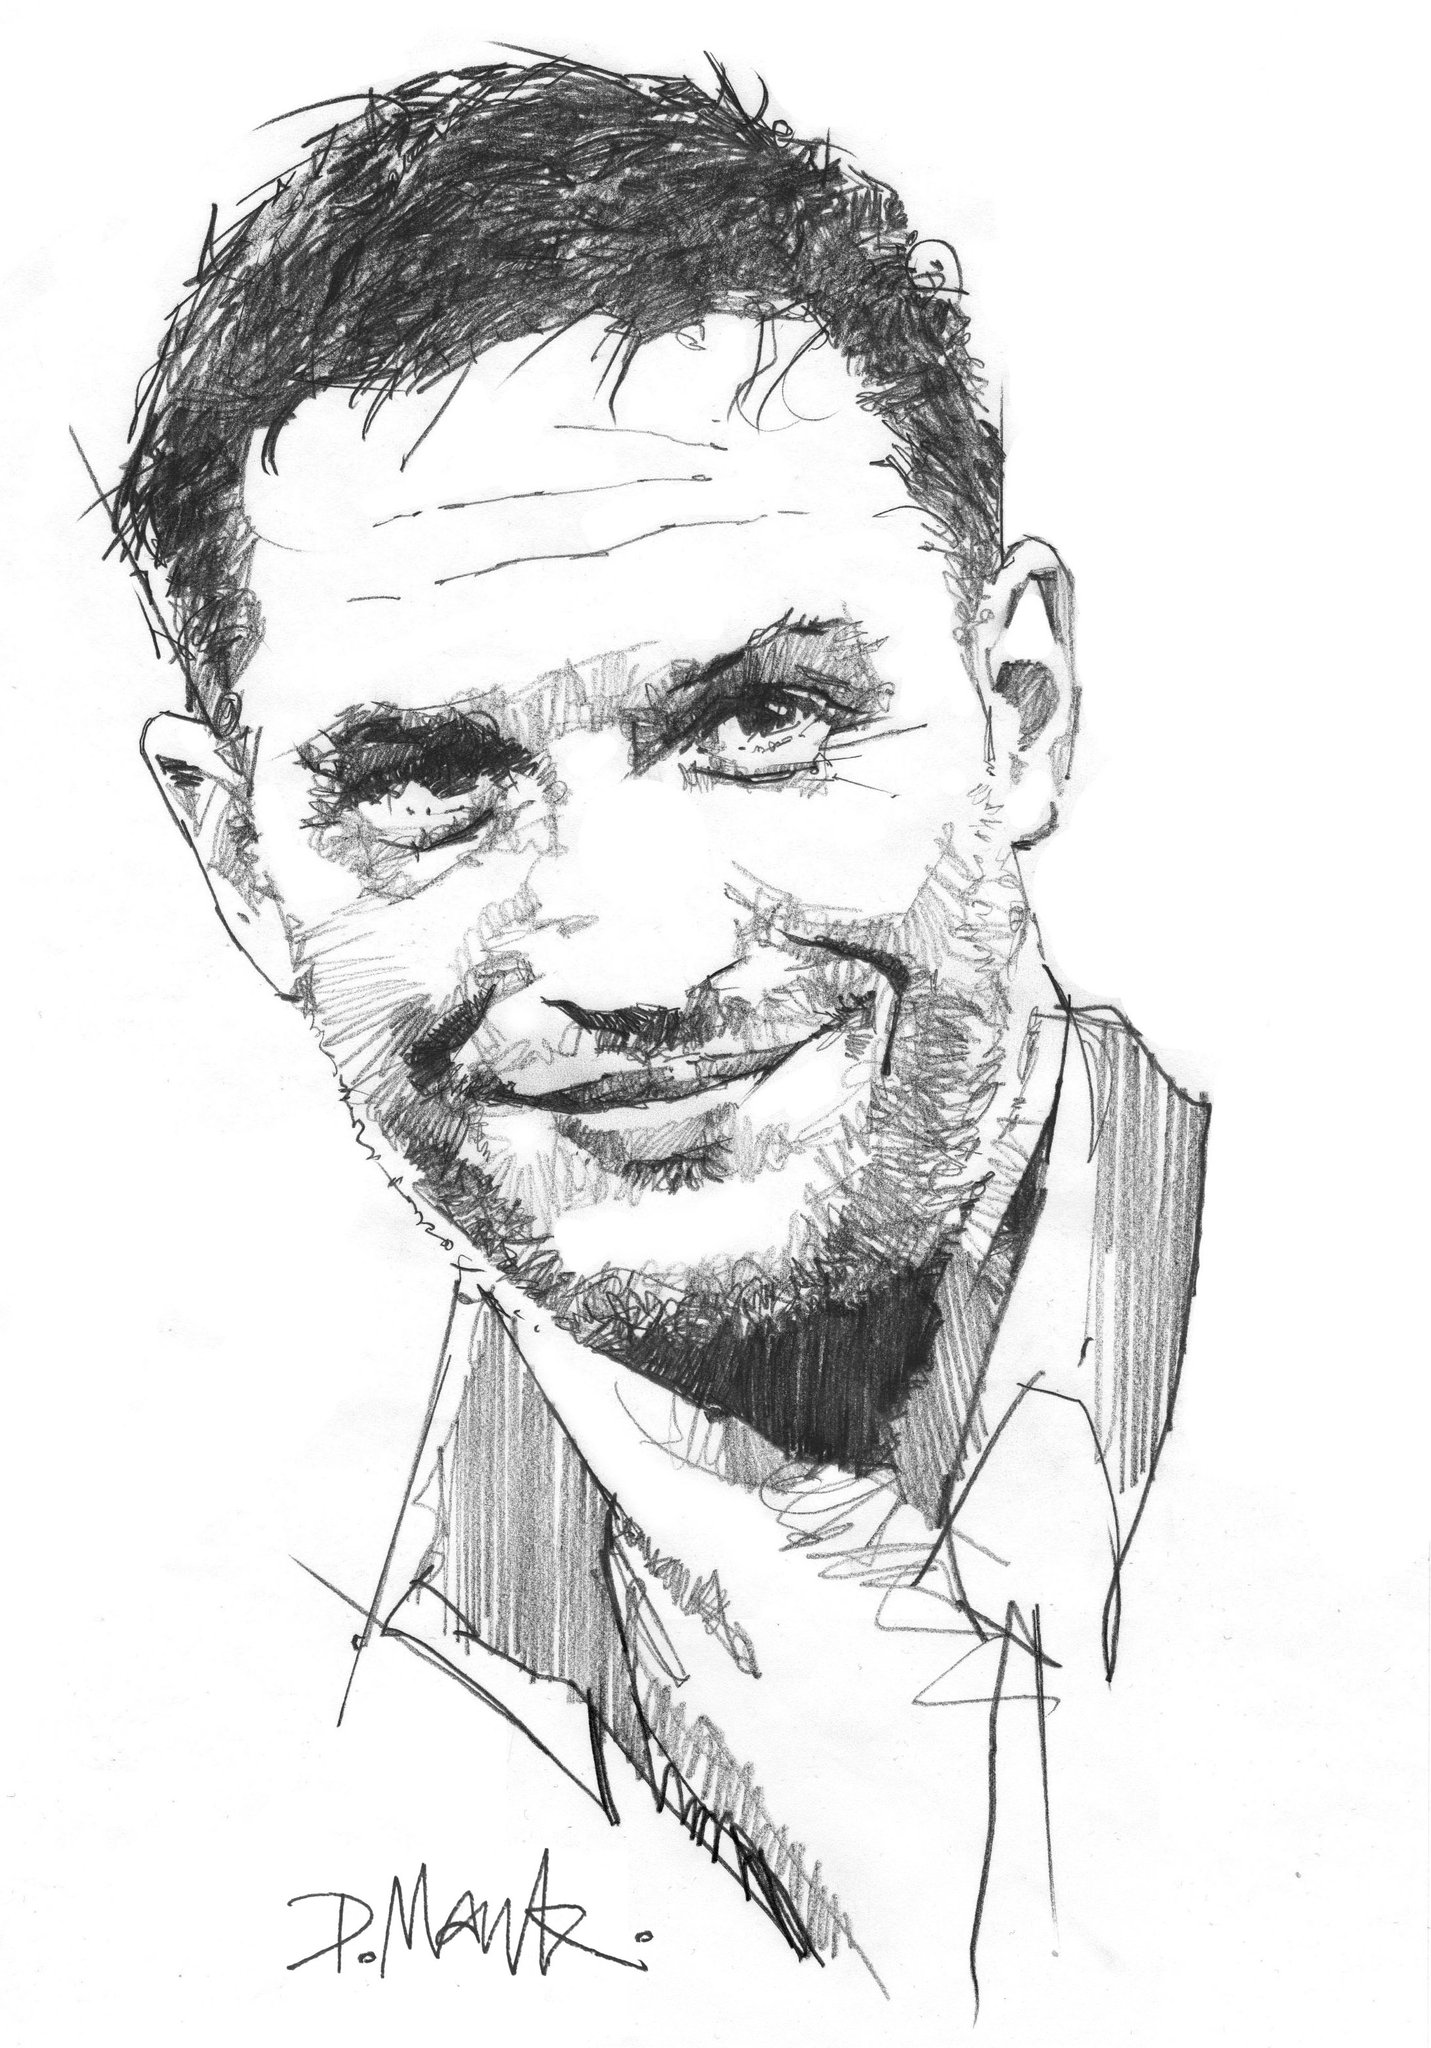 Happy Birthday Tom Hardy 41 today
Some Drawings 